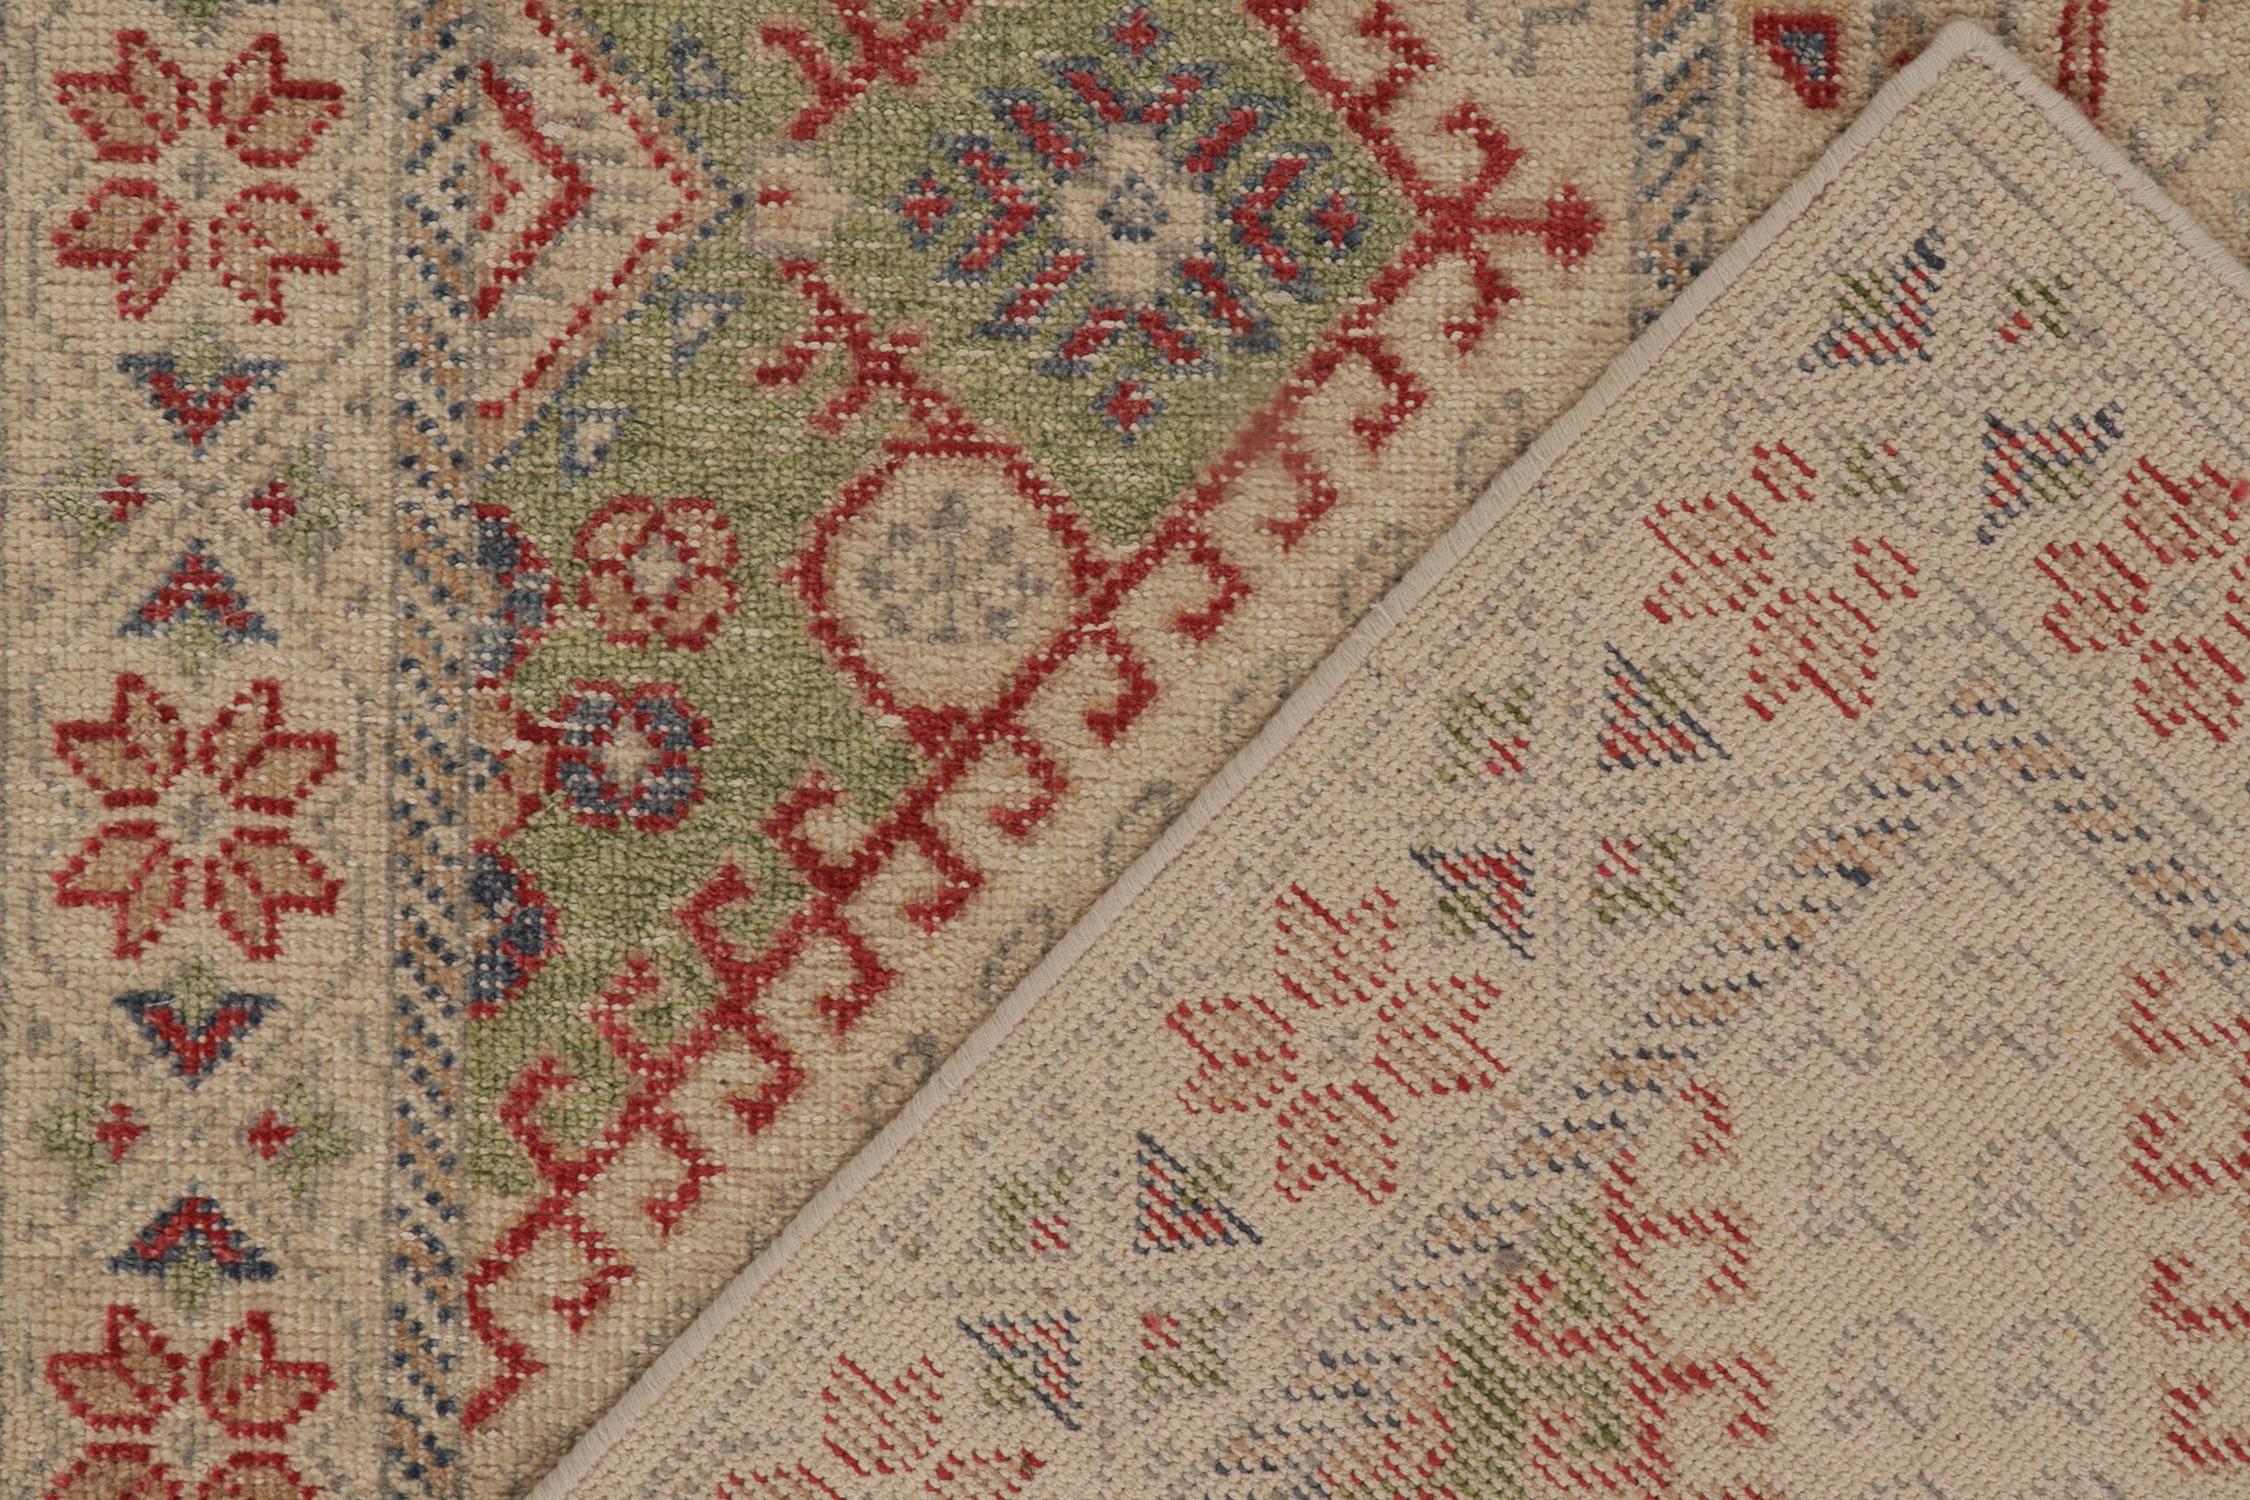 Rug & Kilim's Distressed Ghiordes Style Rug in Greige, Green, Red Medallion Neuf - En vente à Long Island City, NY